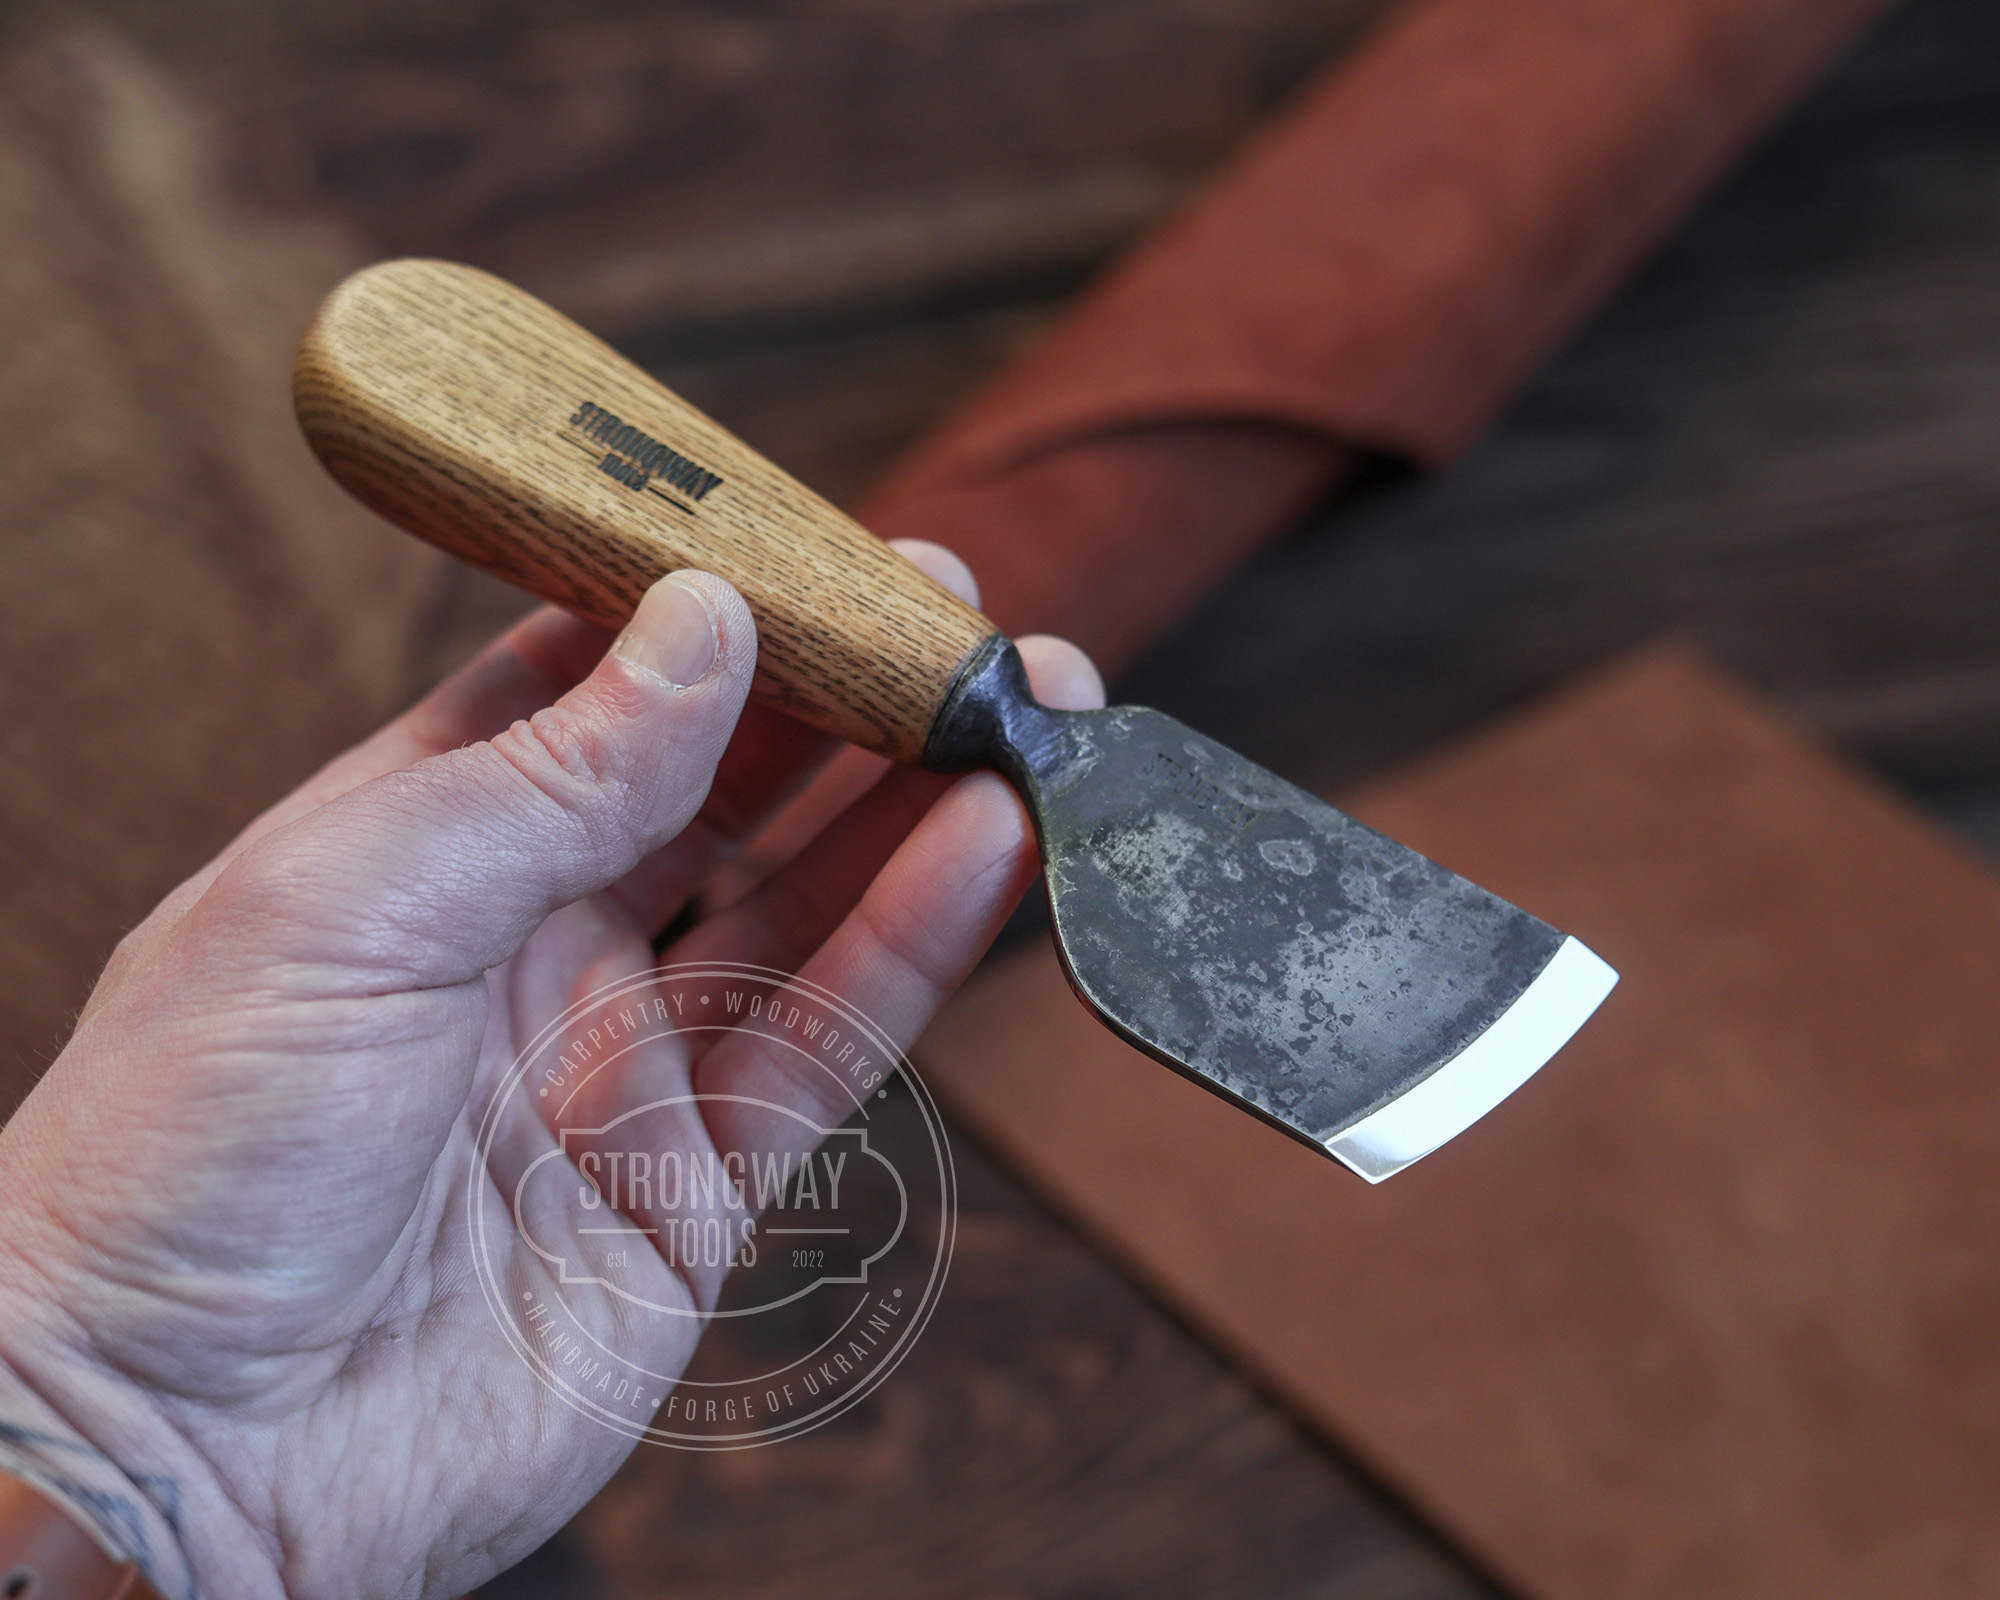 Leather Knife Cutting Knife Edging Knife with Wooden Handle. Leather  Working Skiving Knife for DIY Leather craft - by STAMESKY (Rounded Edge)